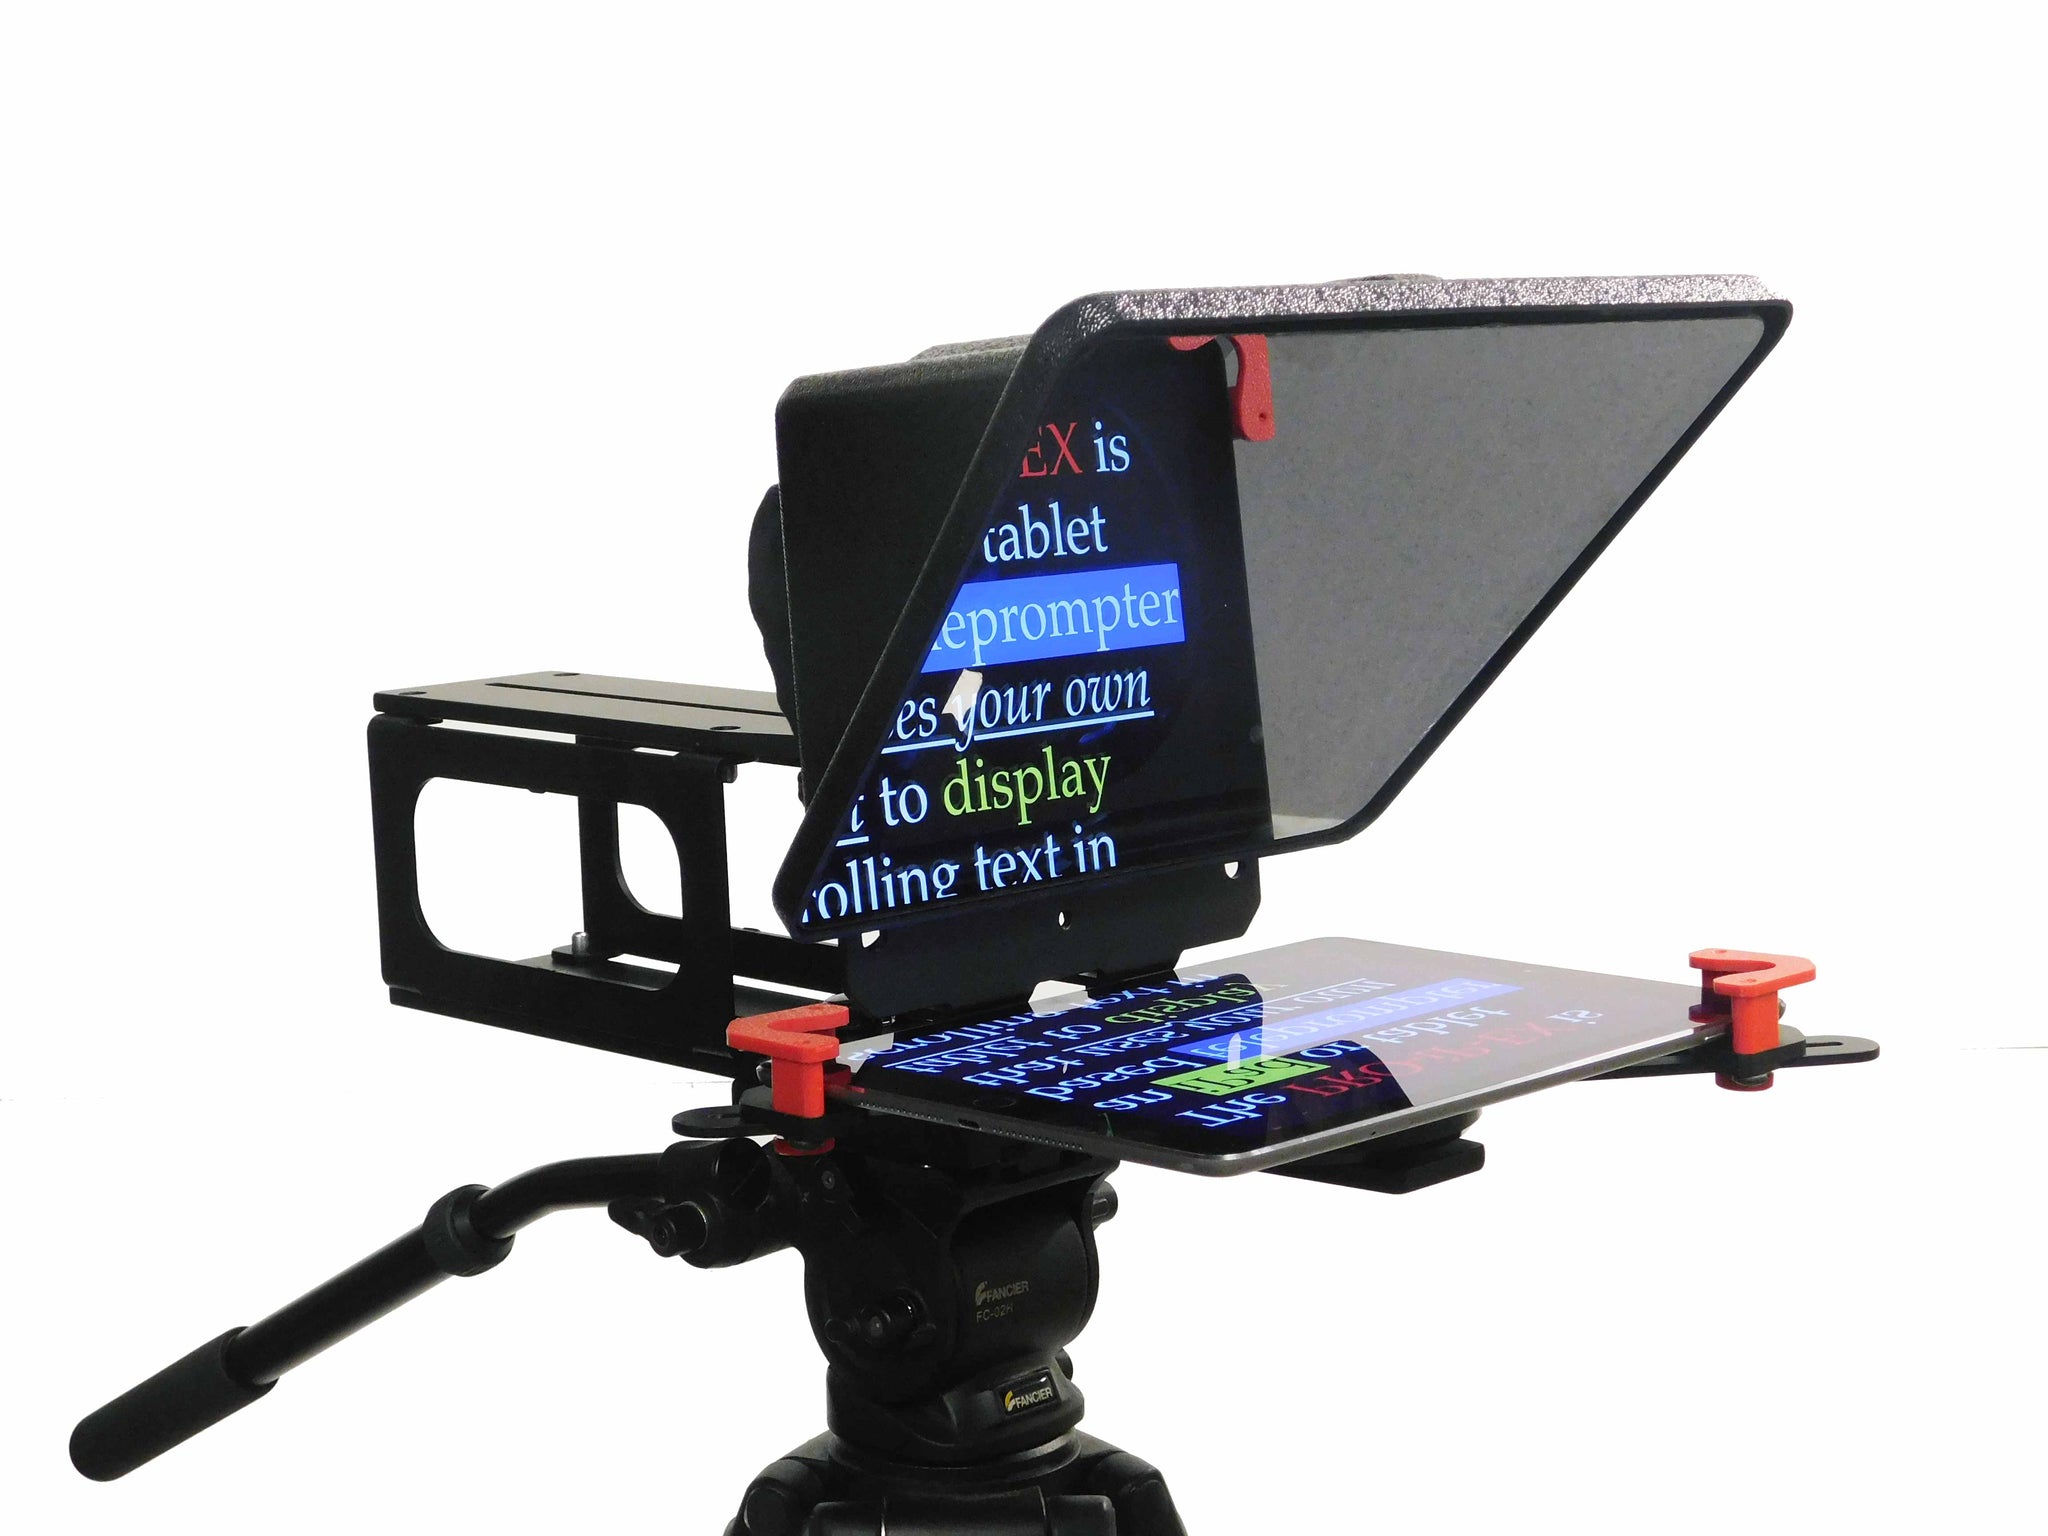 teleprompter for ipad app